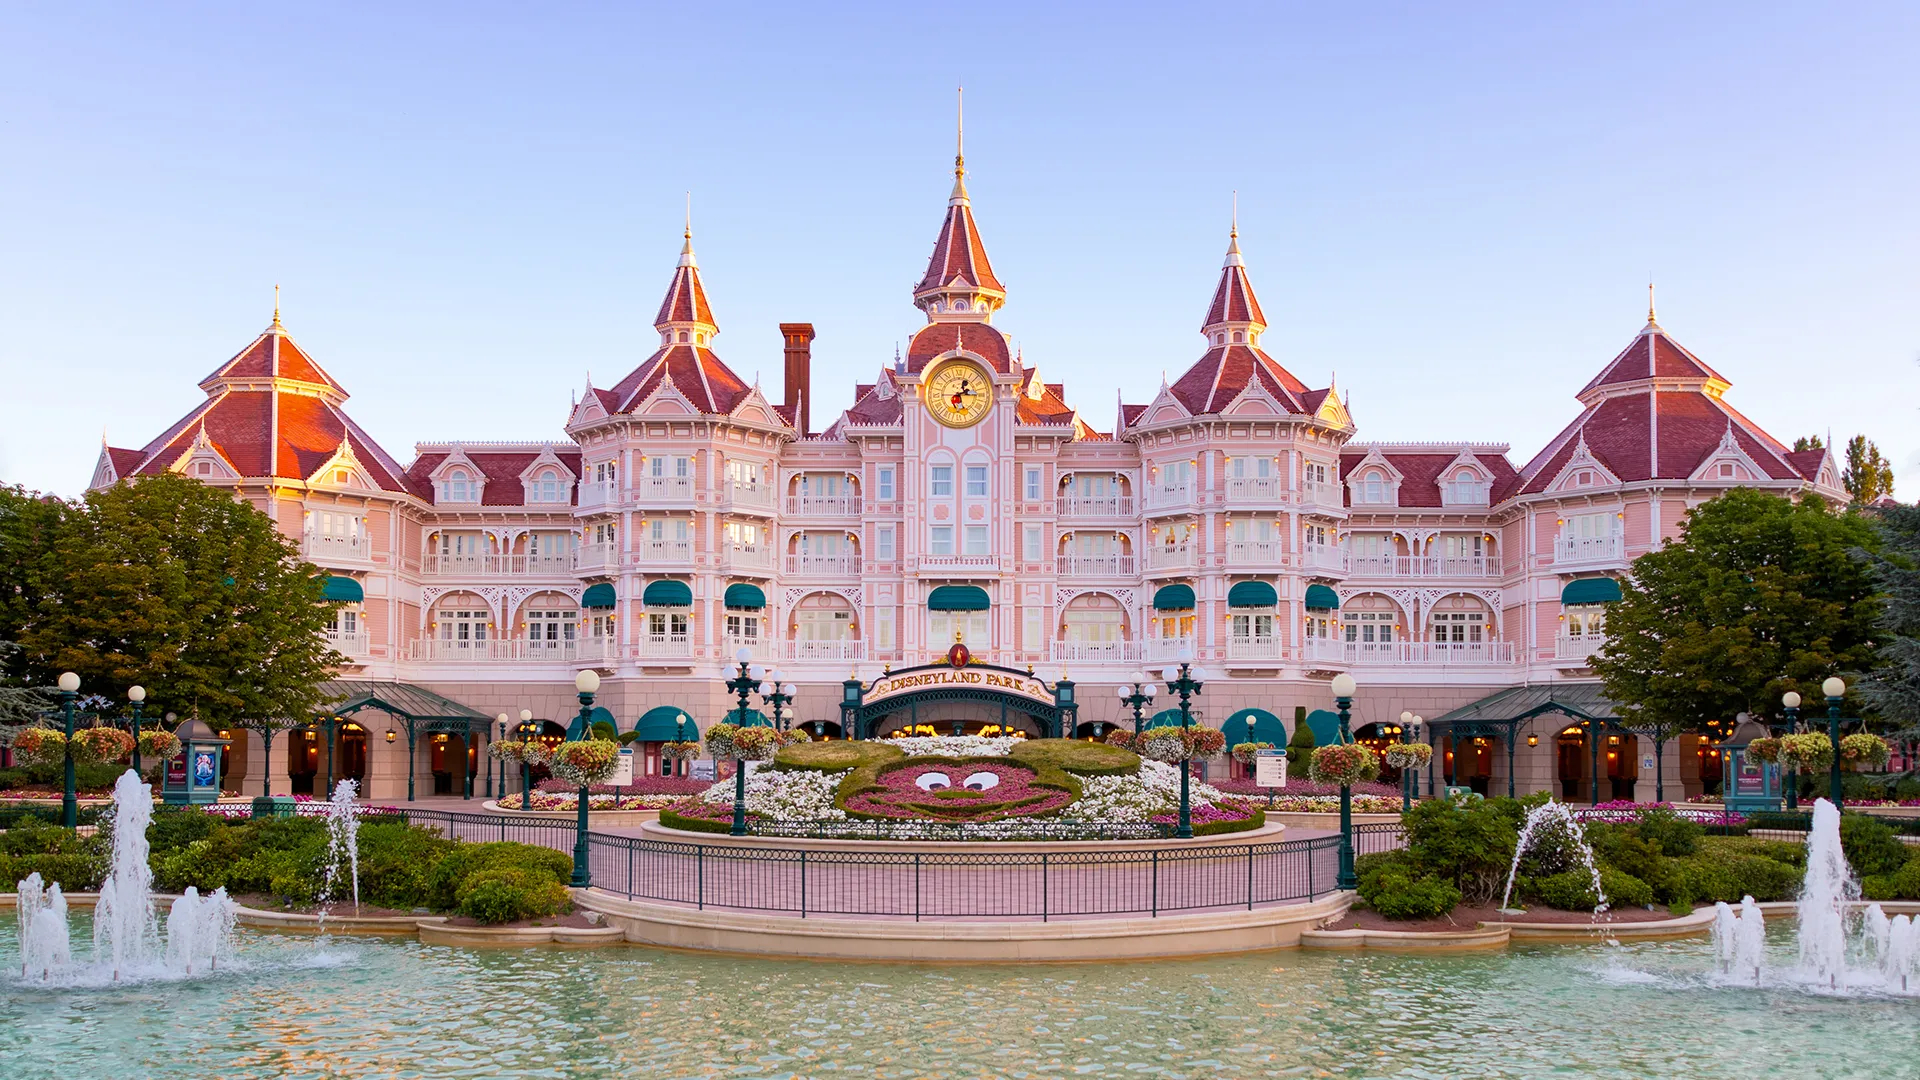 Unveiling a Fairy Tale: The $540 Million Magic Sprinkled Over Disneyland Paris